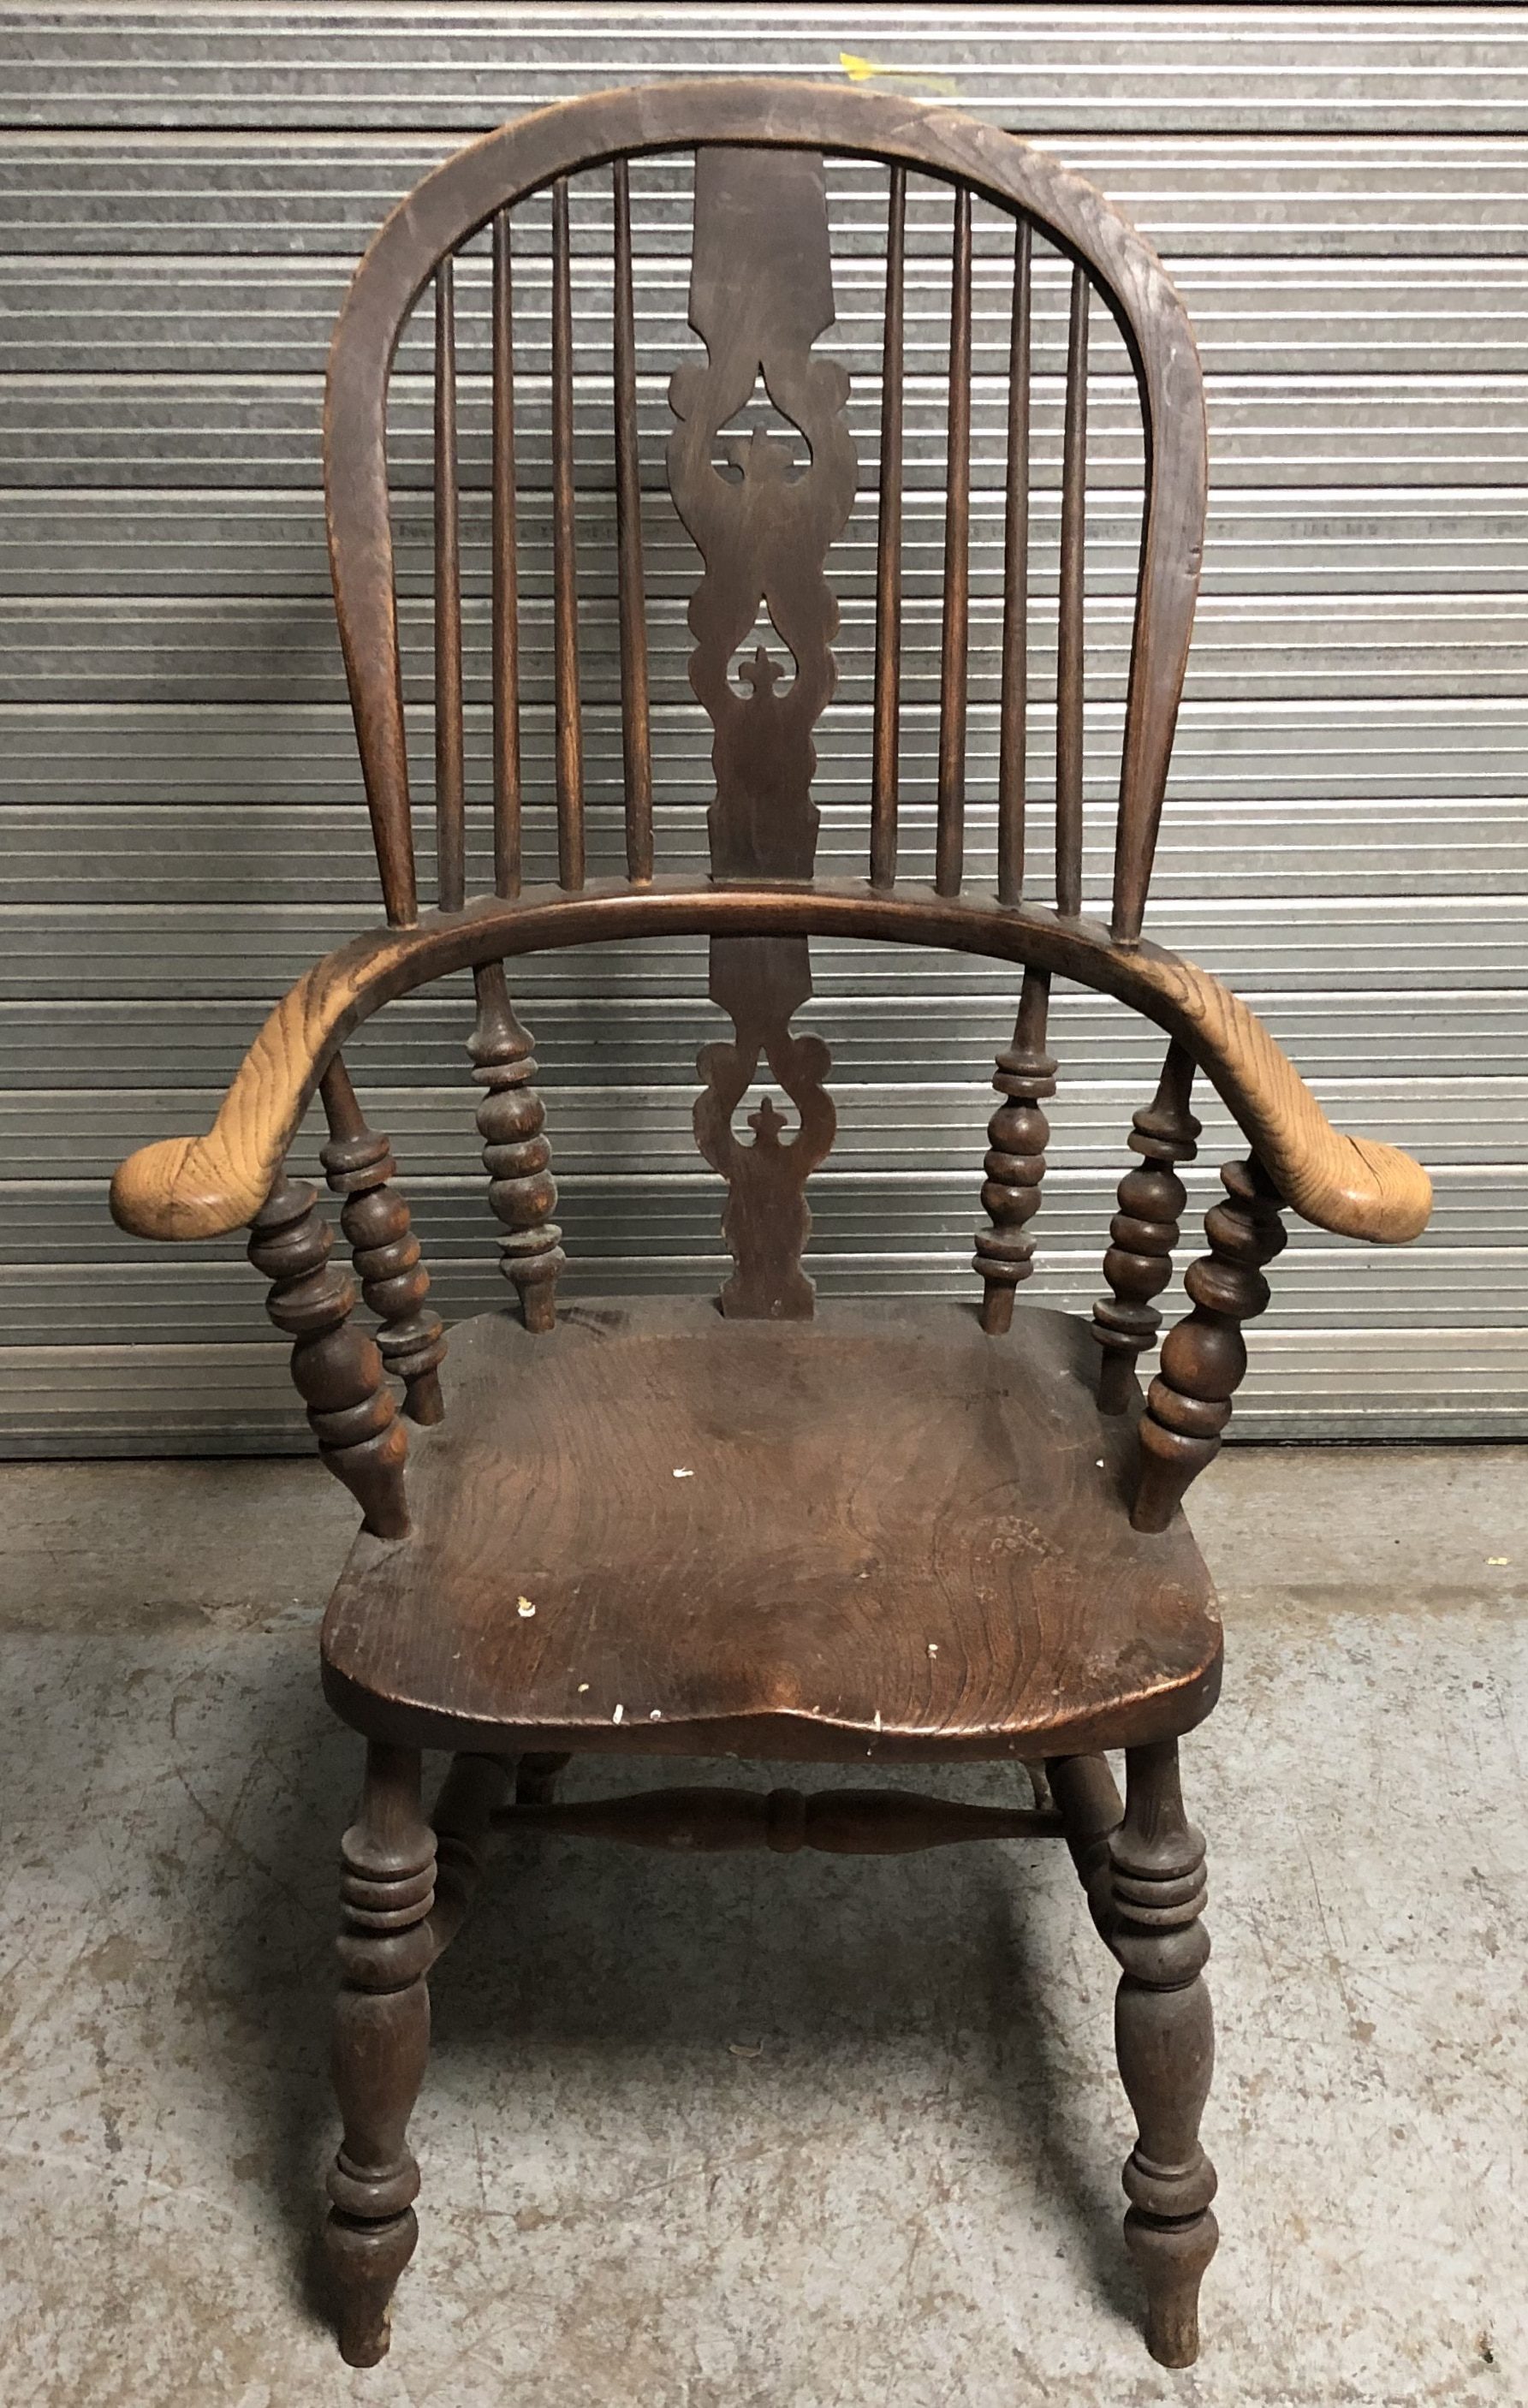 Windsor chair before cleaning